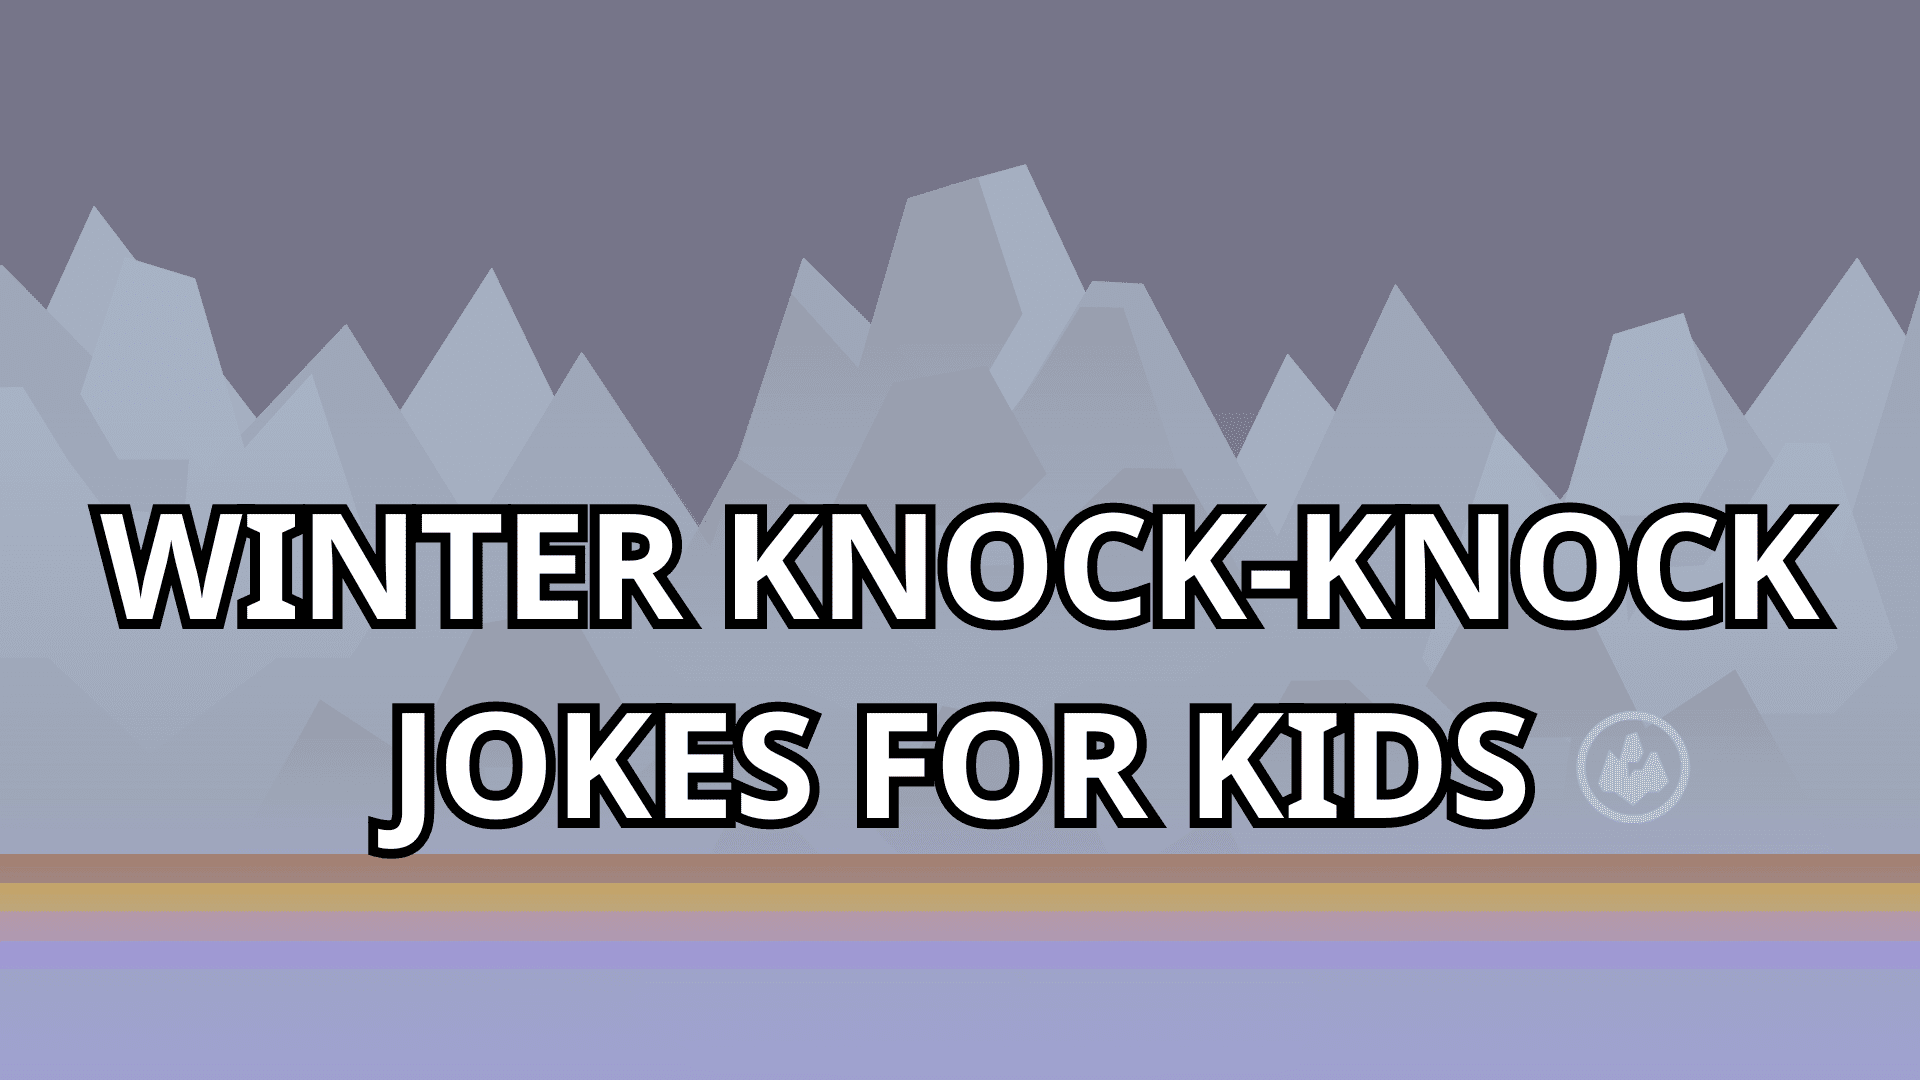 A rocky snowy-white mountain range against a gray sky. The text "Winter Knock-Knock Jokes for Kids".